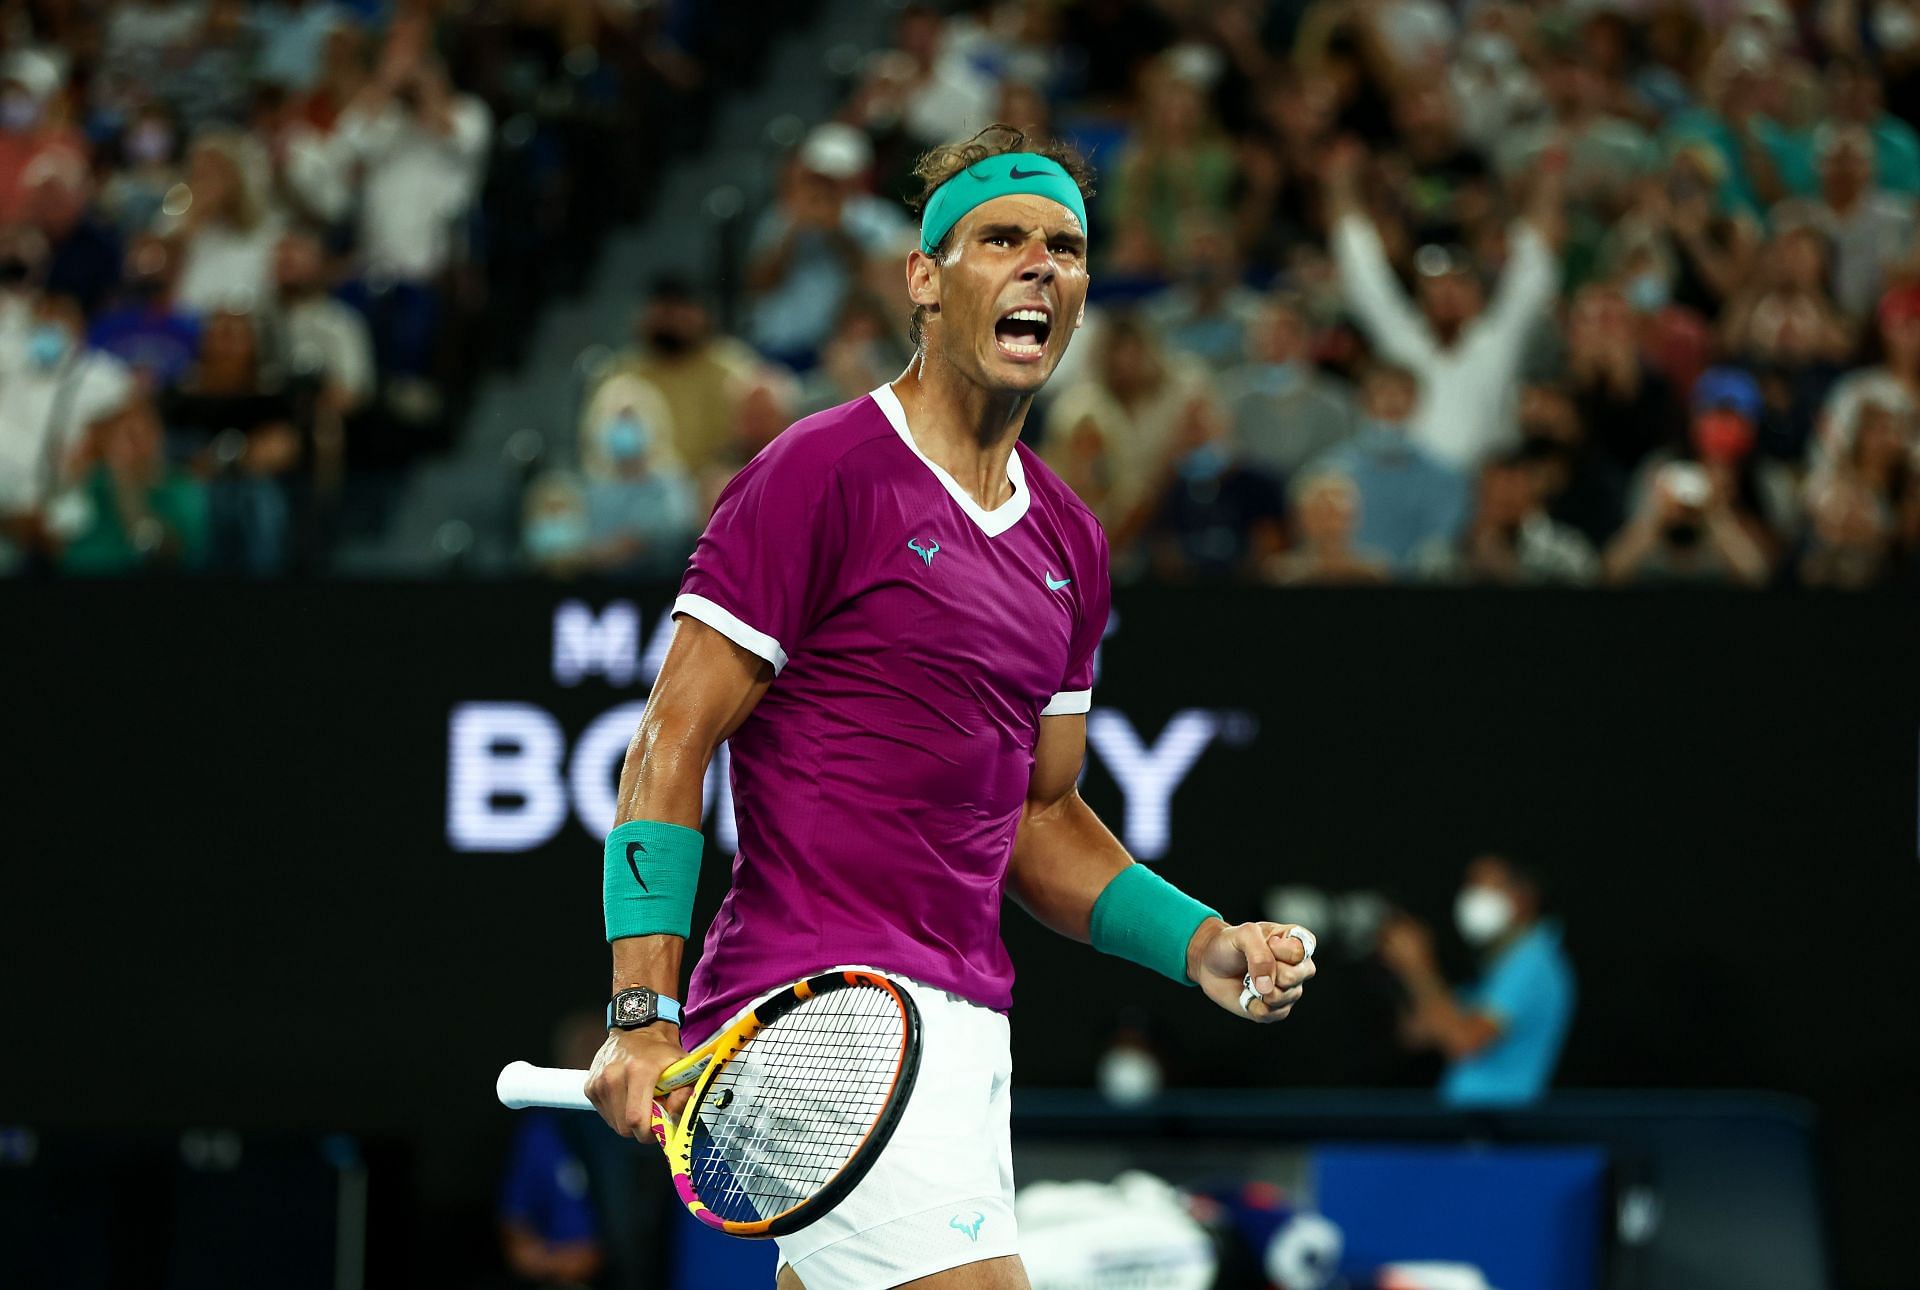 Rafael Nadals next match Opponent, venue, live streaming, TV channel and schedule Indian Wells 2022